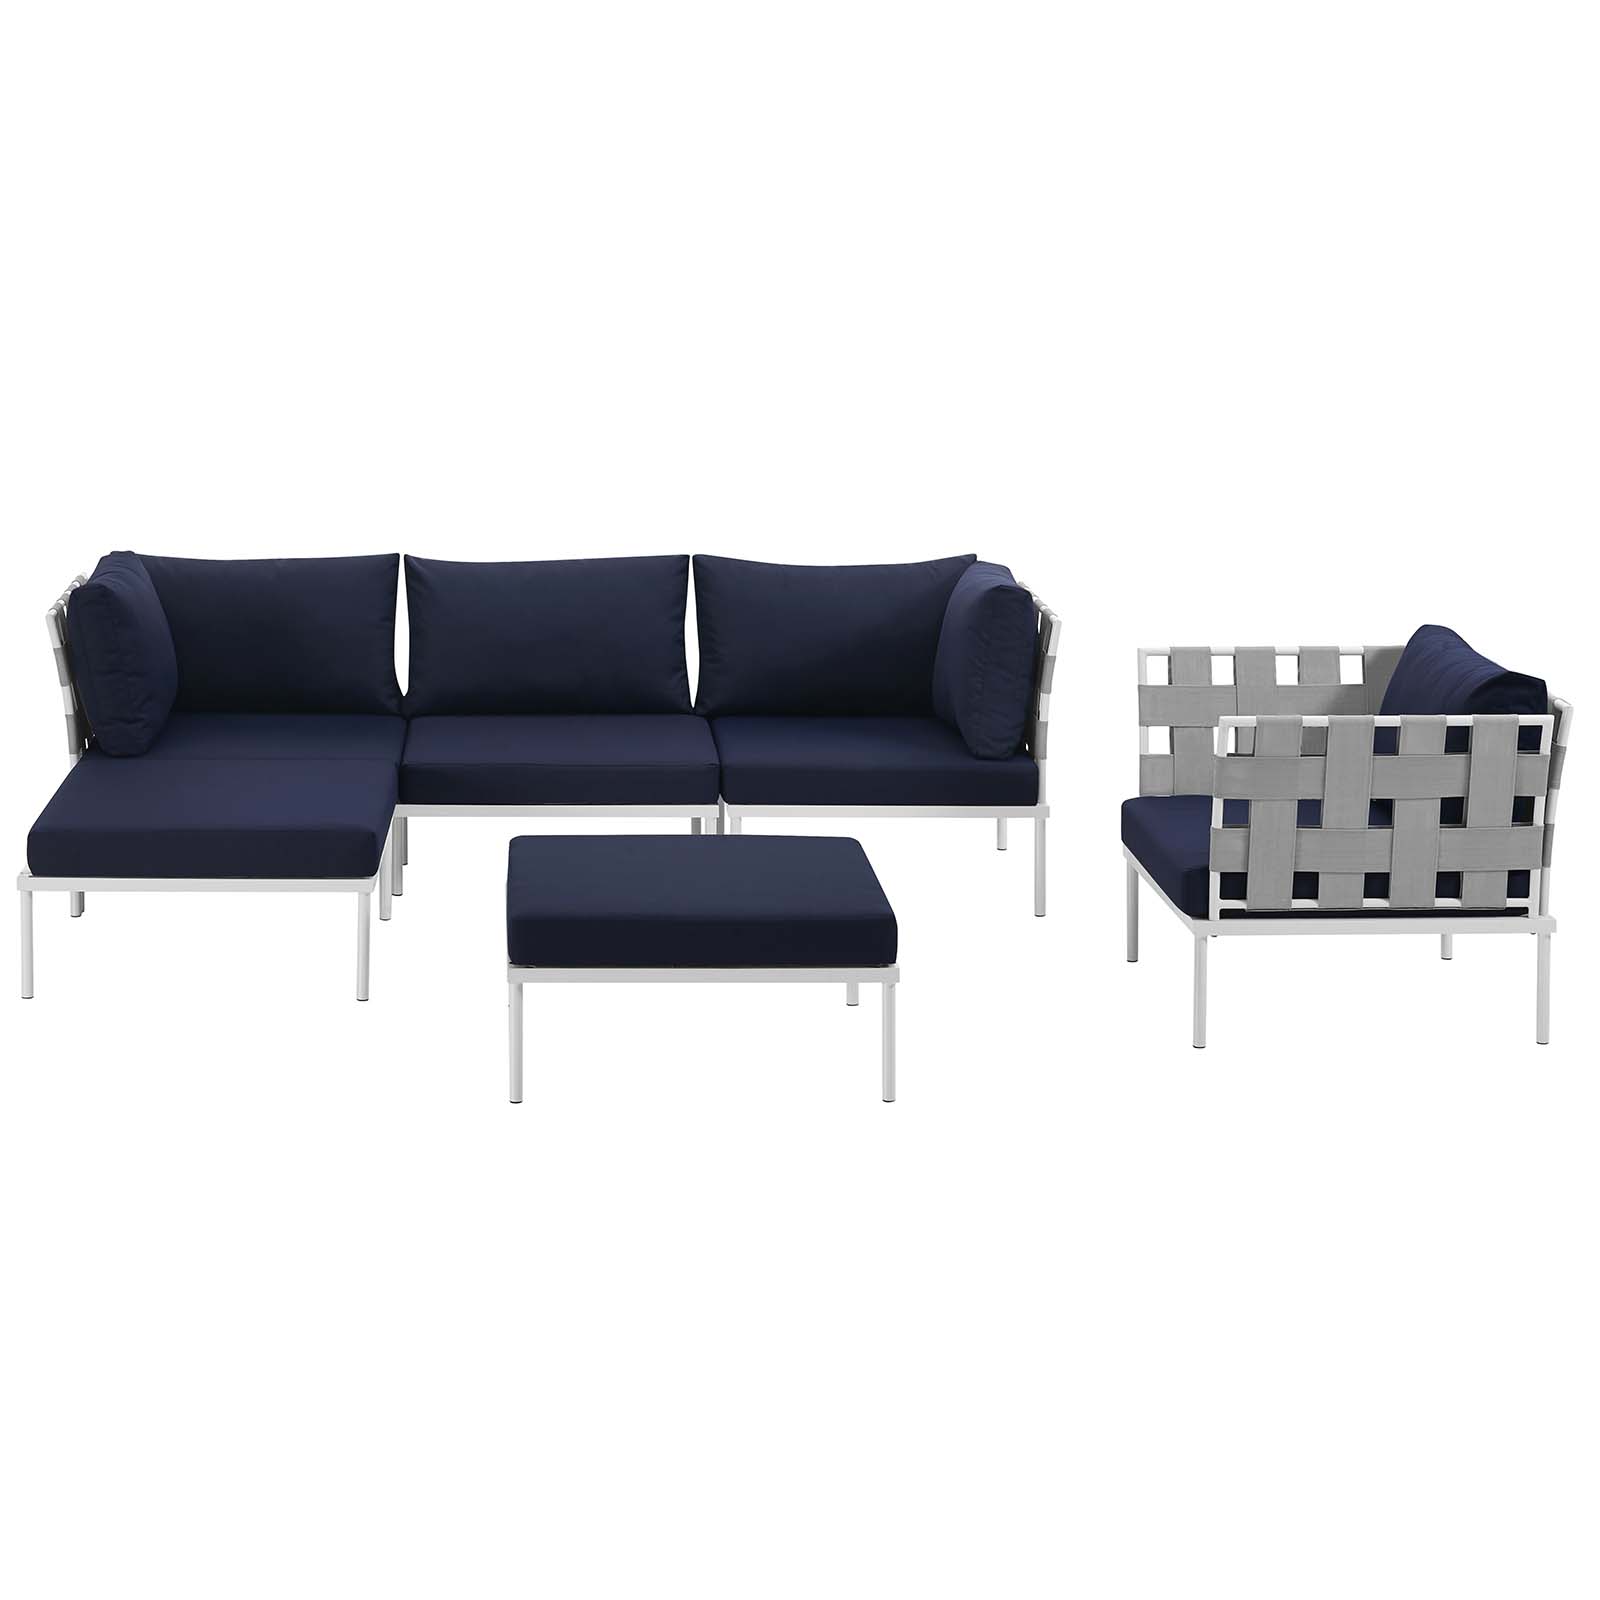 Modway Harmony 6 Piece Outdoor Patio Aluminum Sectional Sofa Set in White Navy - image 4 of 8